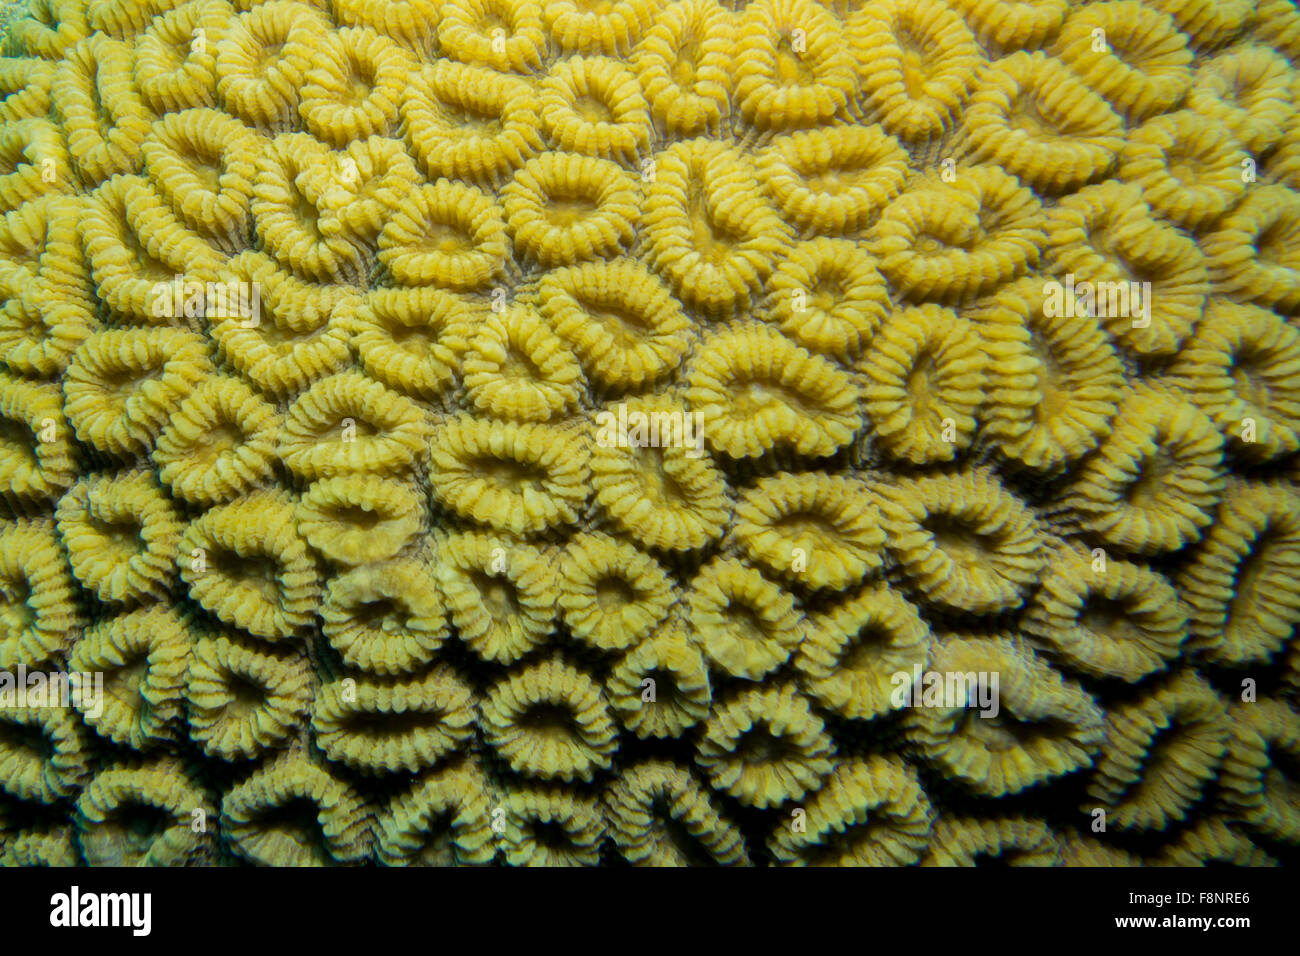 Honeycomb Coral also called larger star coral, Favites abdita, from the Southern Red Sea, Marsa Alam, Egypt. Stock Photo